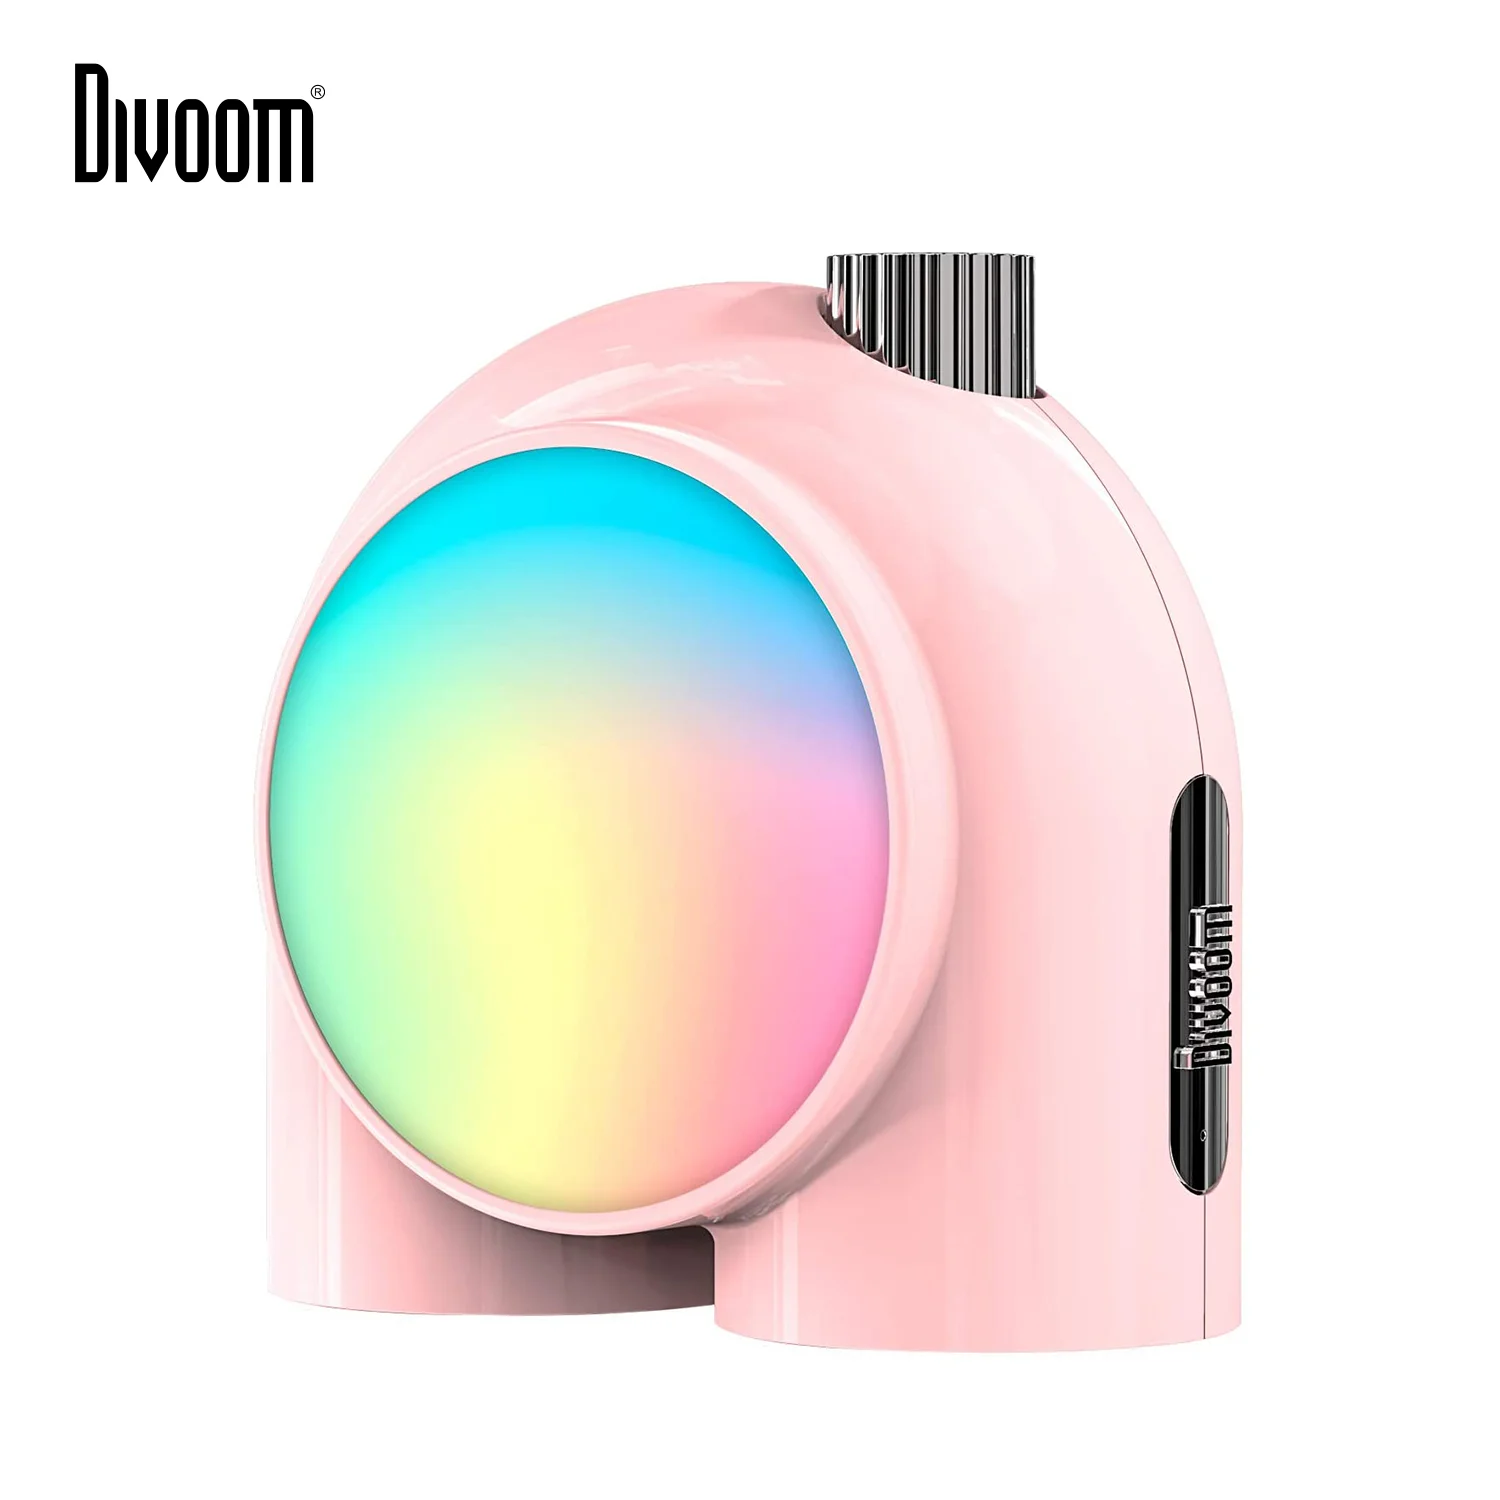 Divoom Planet-9 Decorative Mood Lamp with Programmable RGB LED Light Effects, Neon Light Atmosphere Bedside Lamp, Music Control